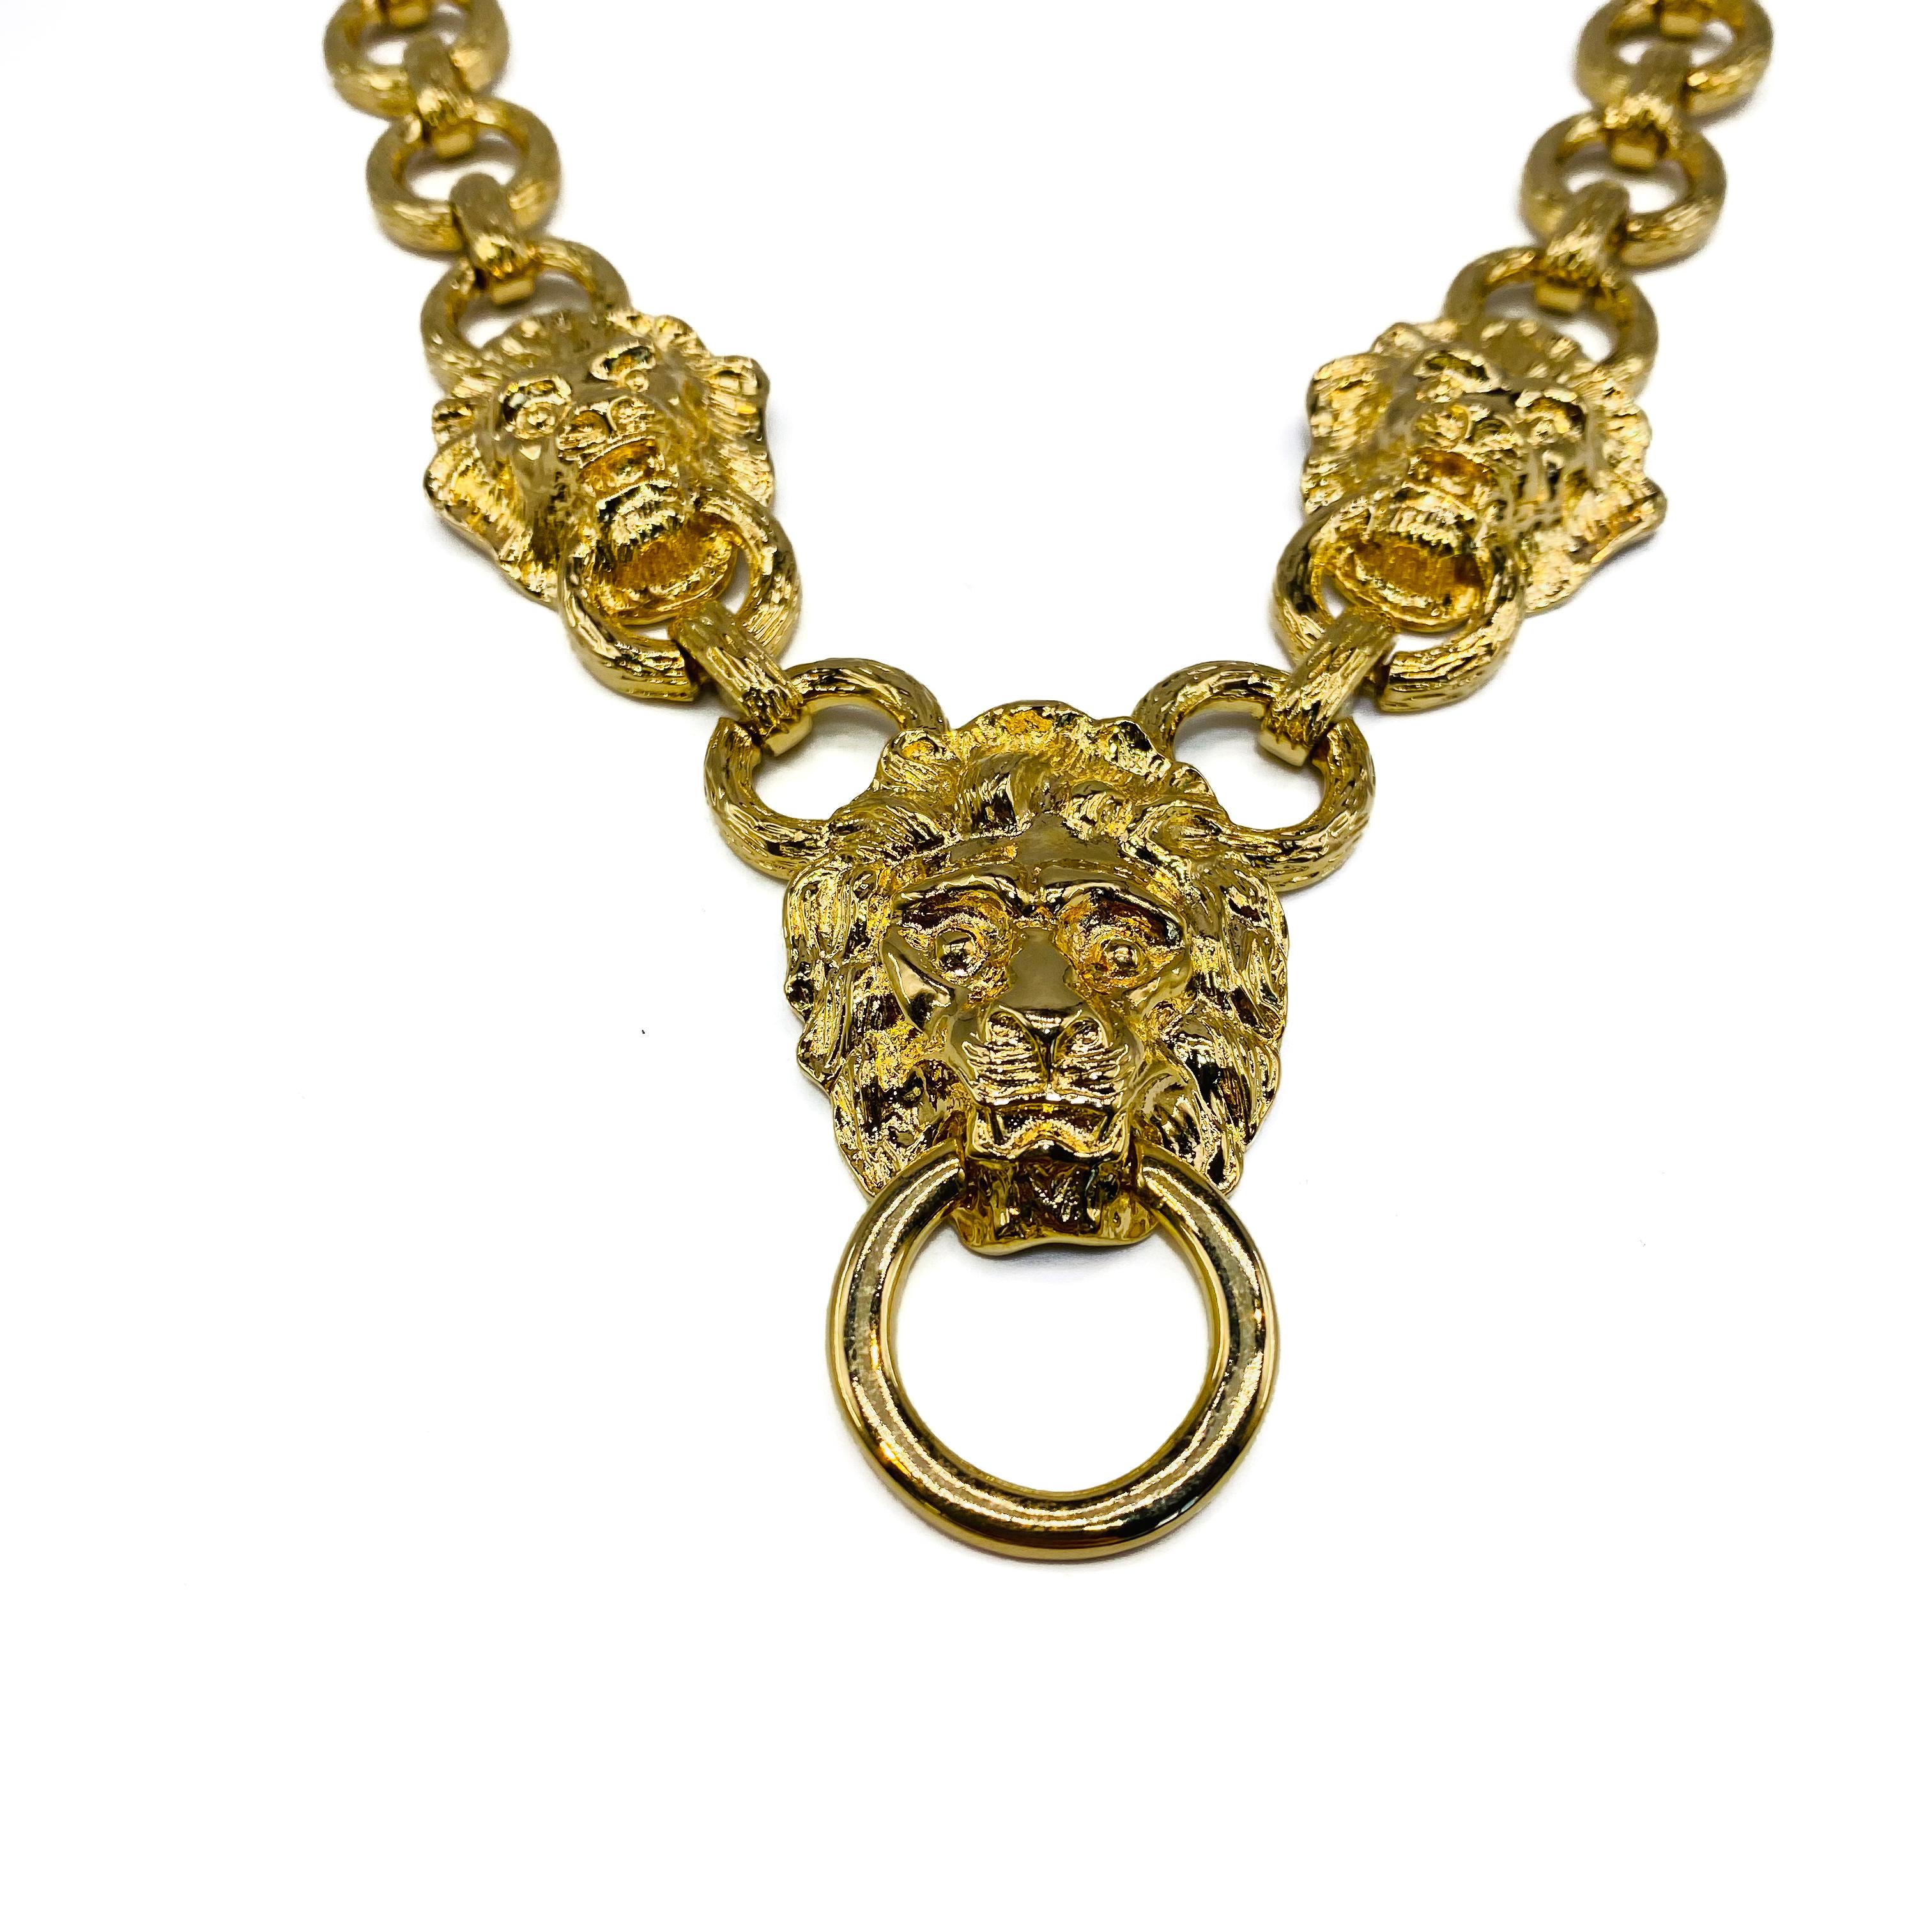 Kenneth Jay Lane Vintage 1980s Necklace

An incredible and collectable statement piece from on of the world's most famous costume jewellery houses

Detail
-Made in the USA in the 1980s
-Cast from gold plated metal
-Features a large chunky chain with